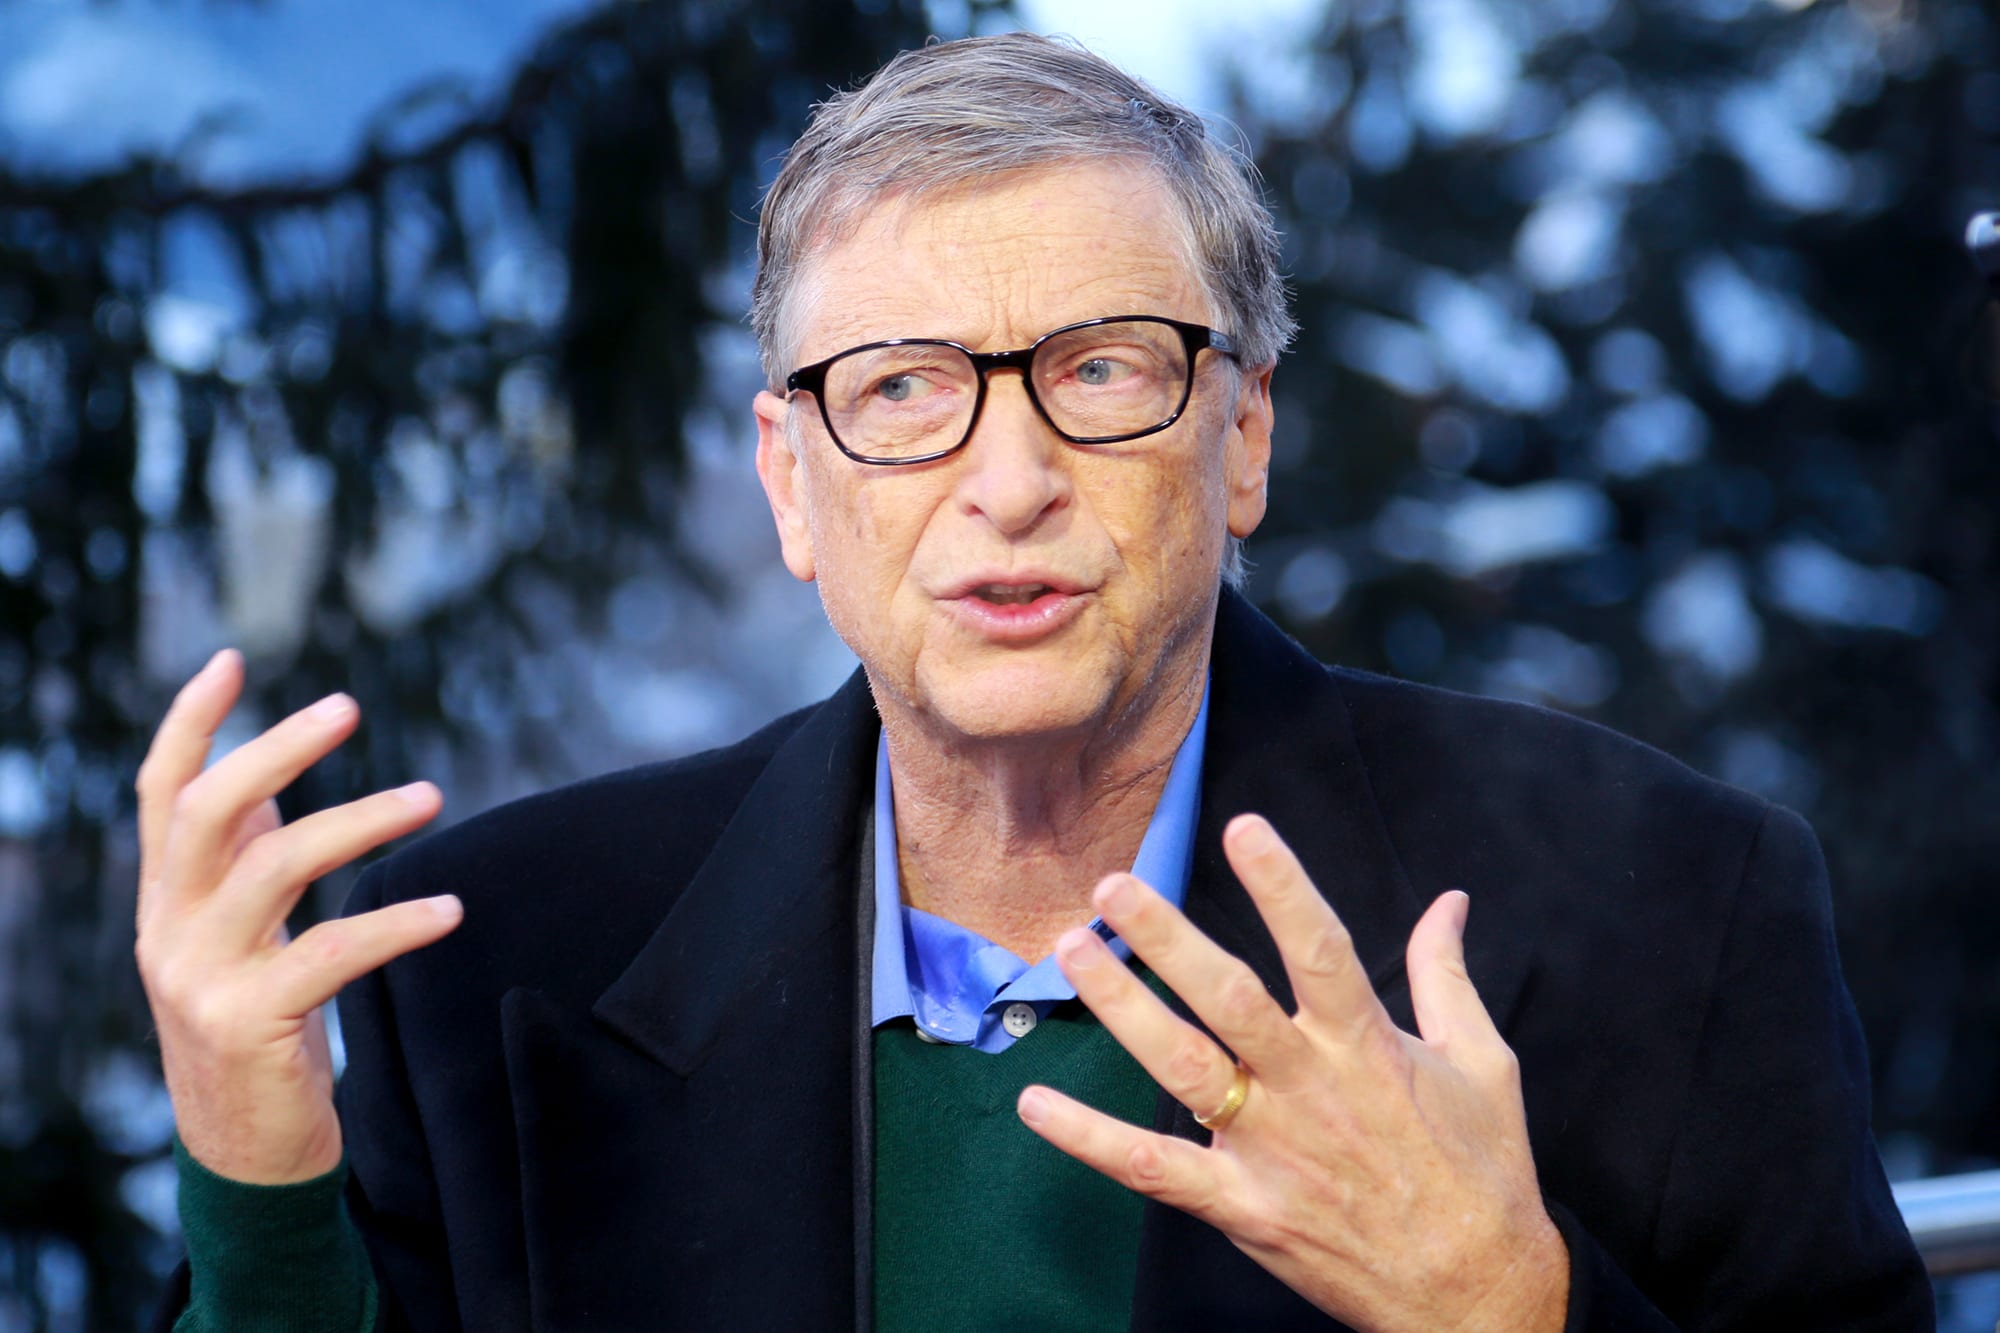 Bill Gates: Countries that shut down for coronavirus could bounce back in weeks